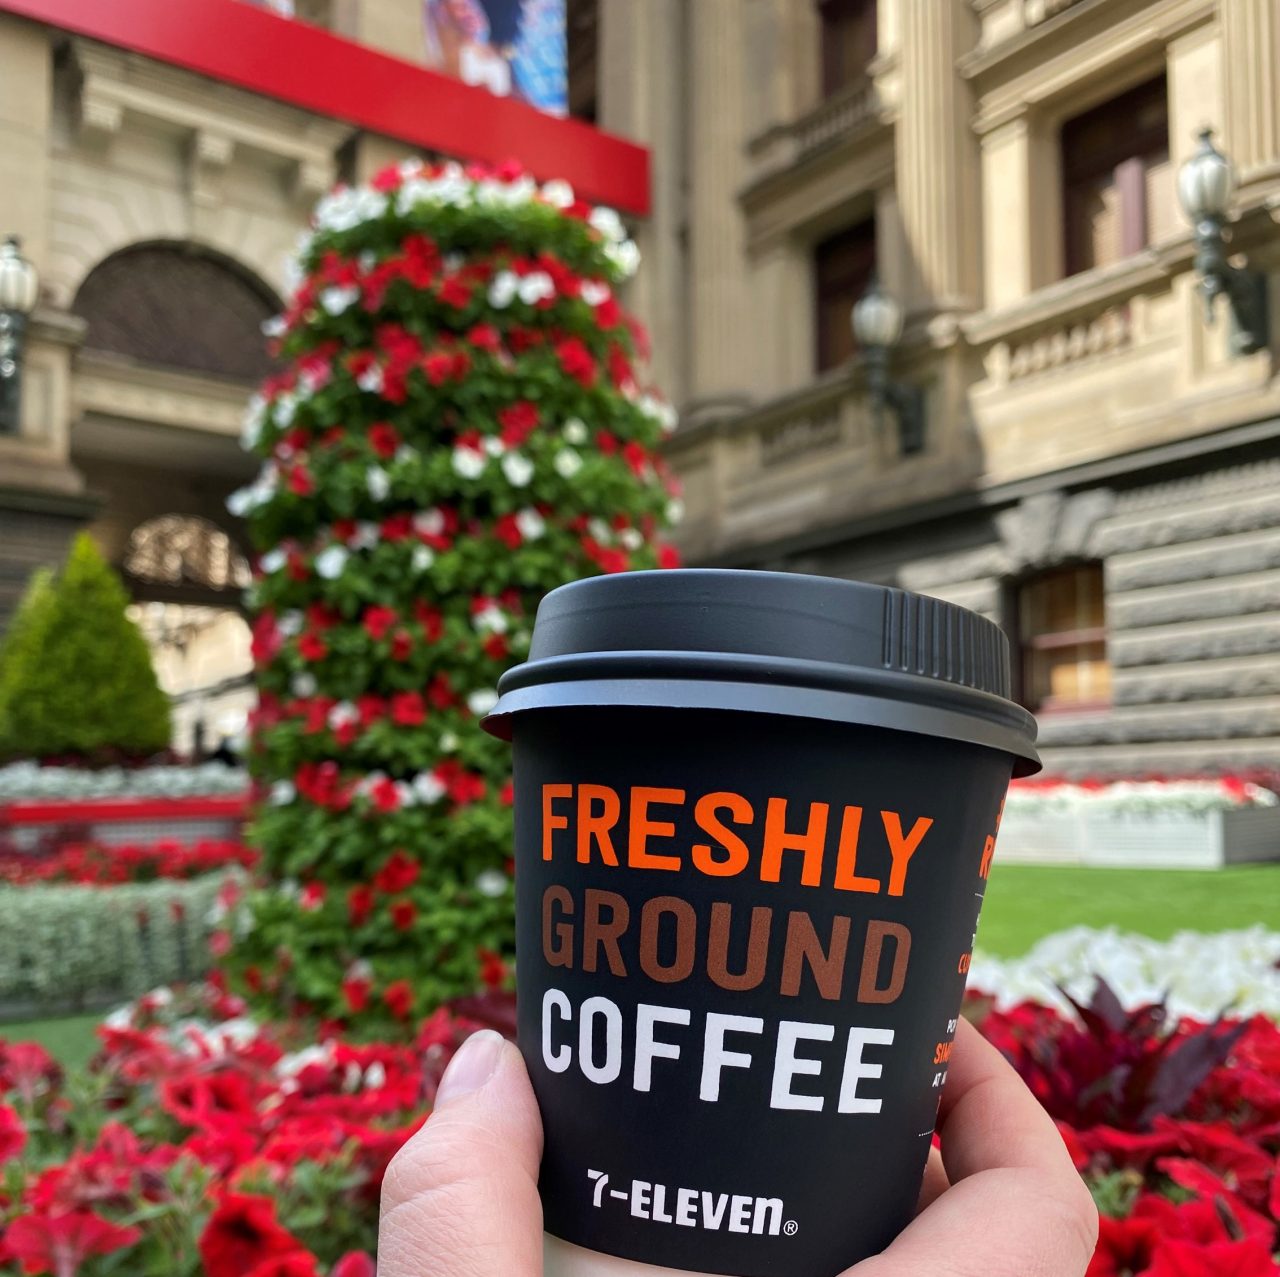 A cup of 7-Eleven coffee with Christmas displays of flowers in the background